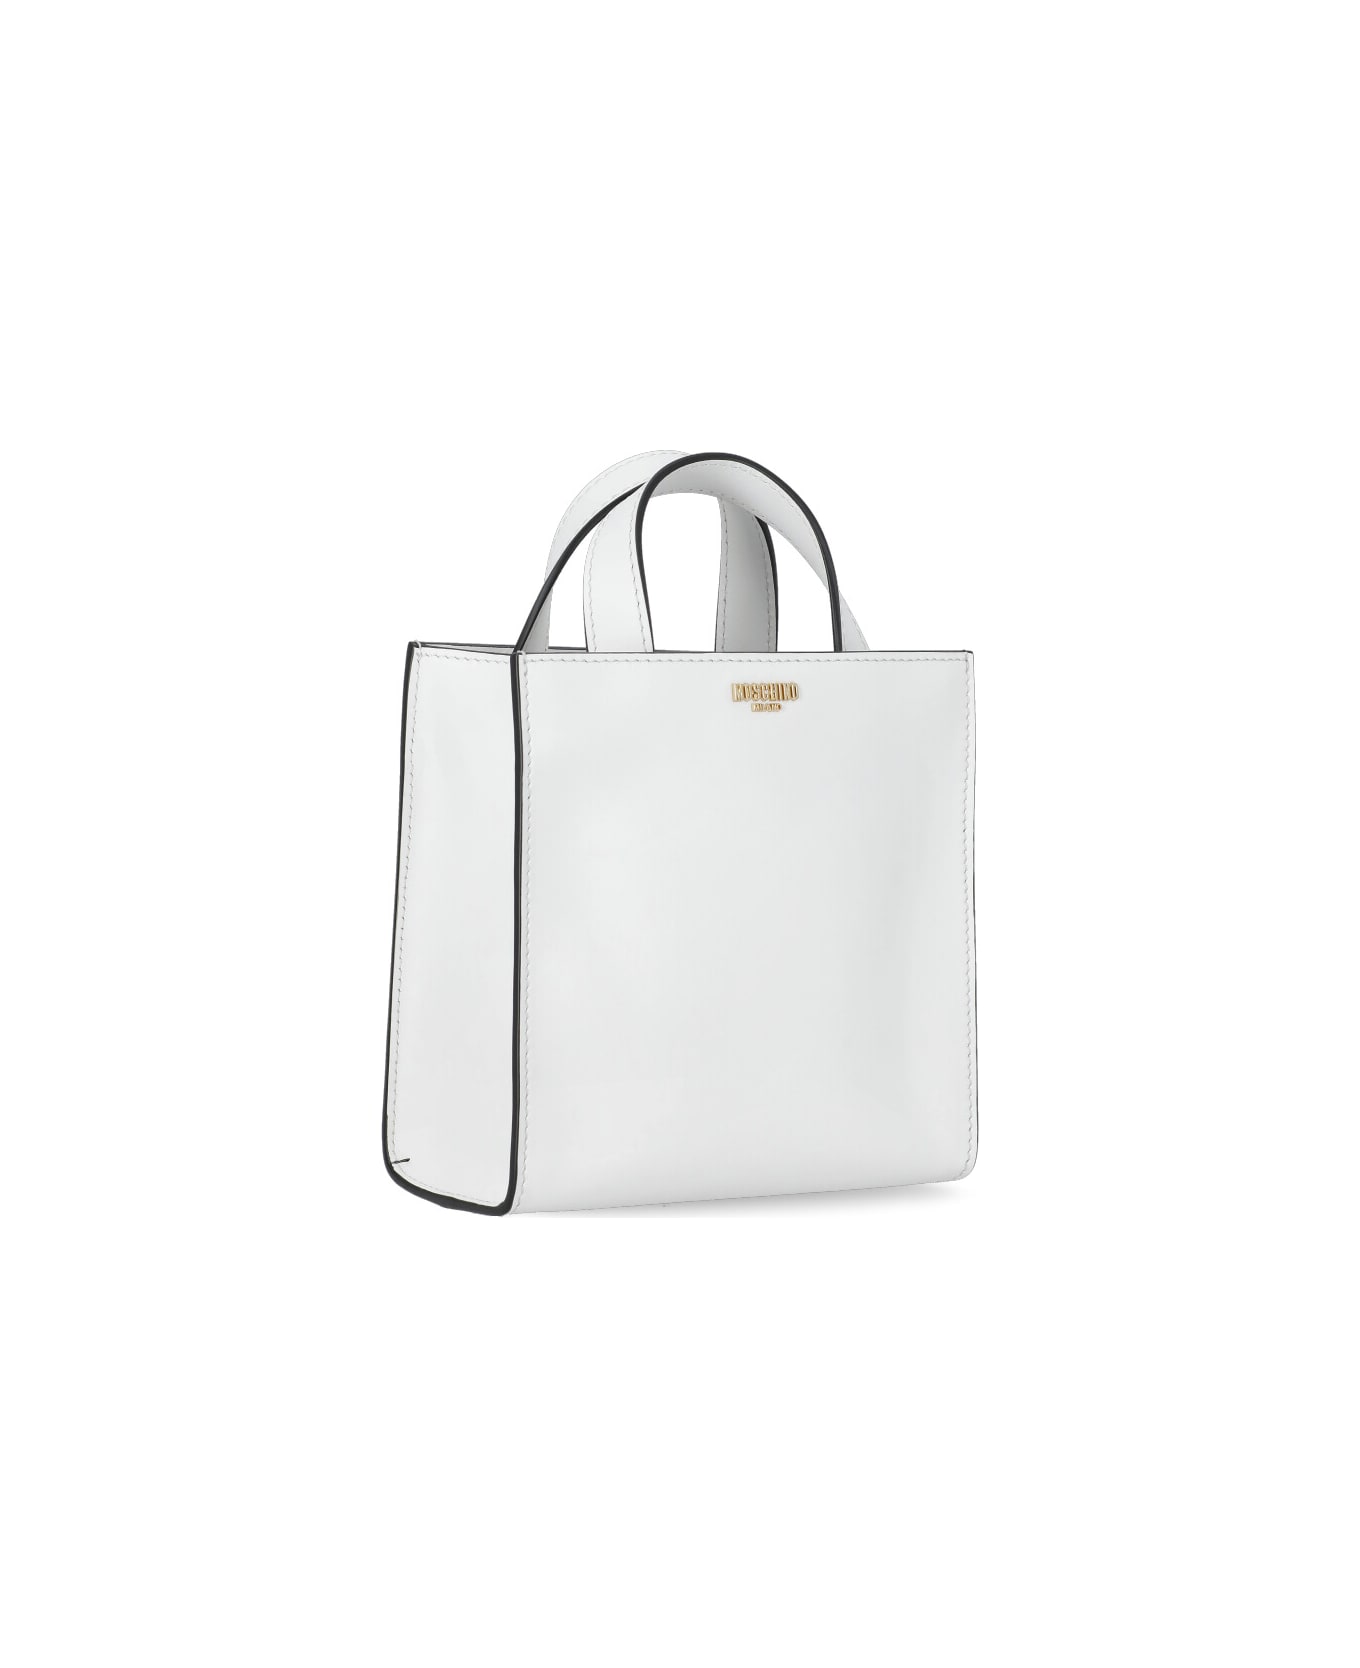 Moschino Leather Shoulder Bag - Bianco トートバッグ